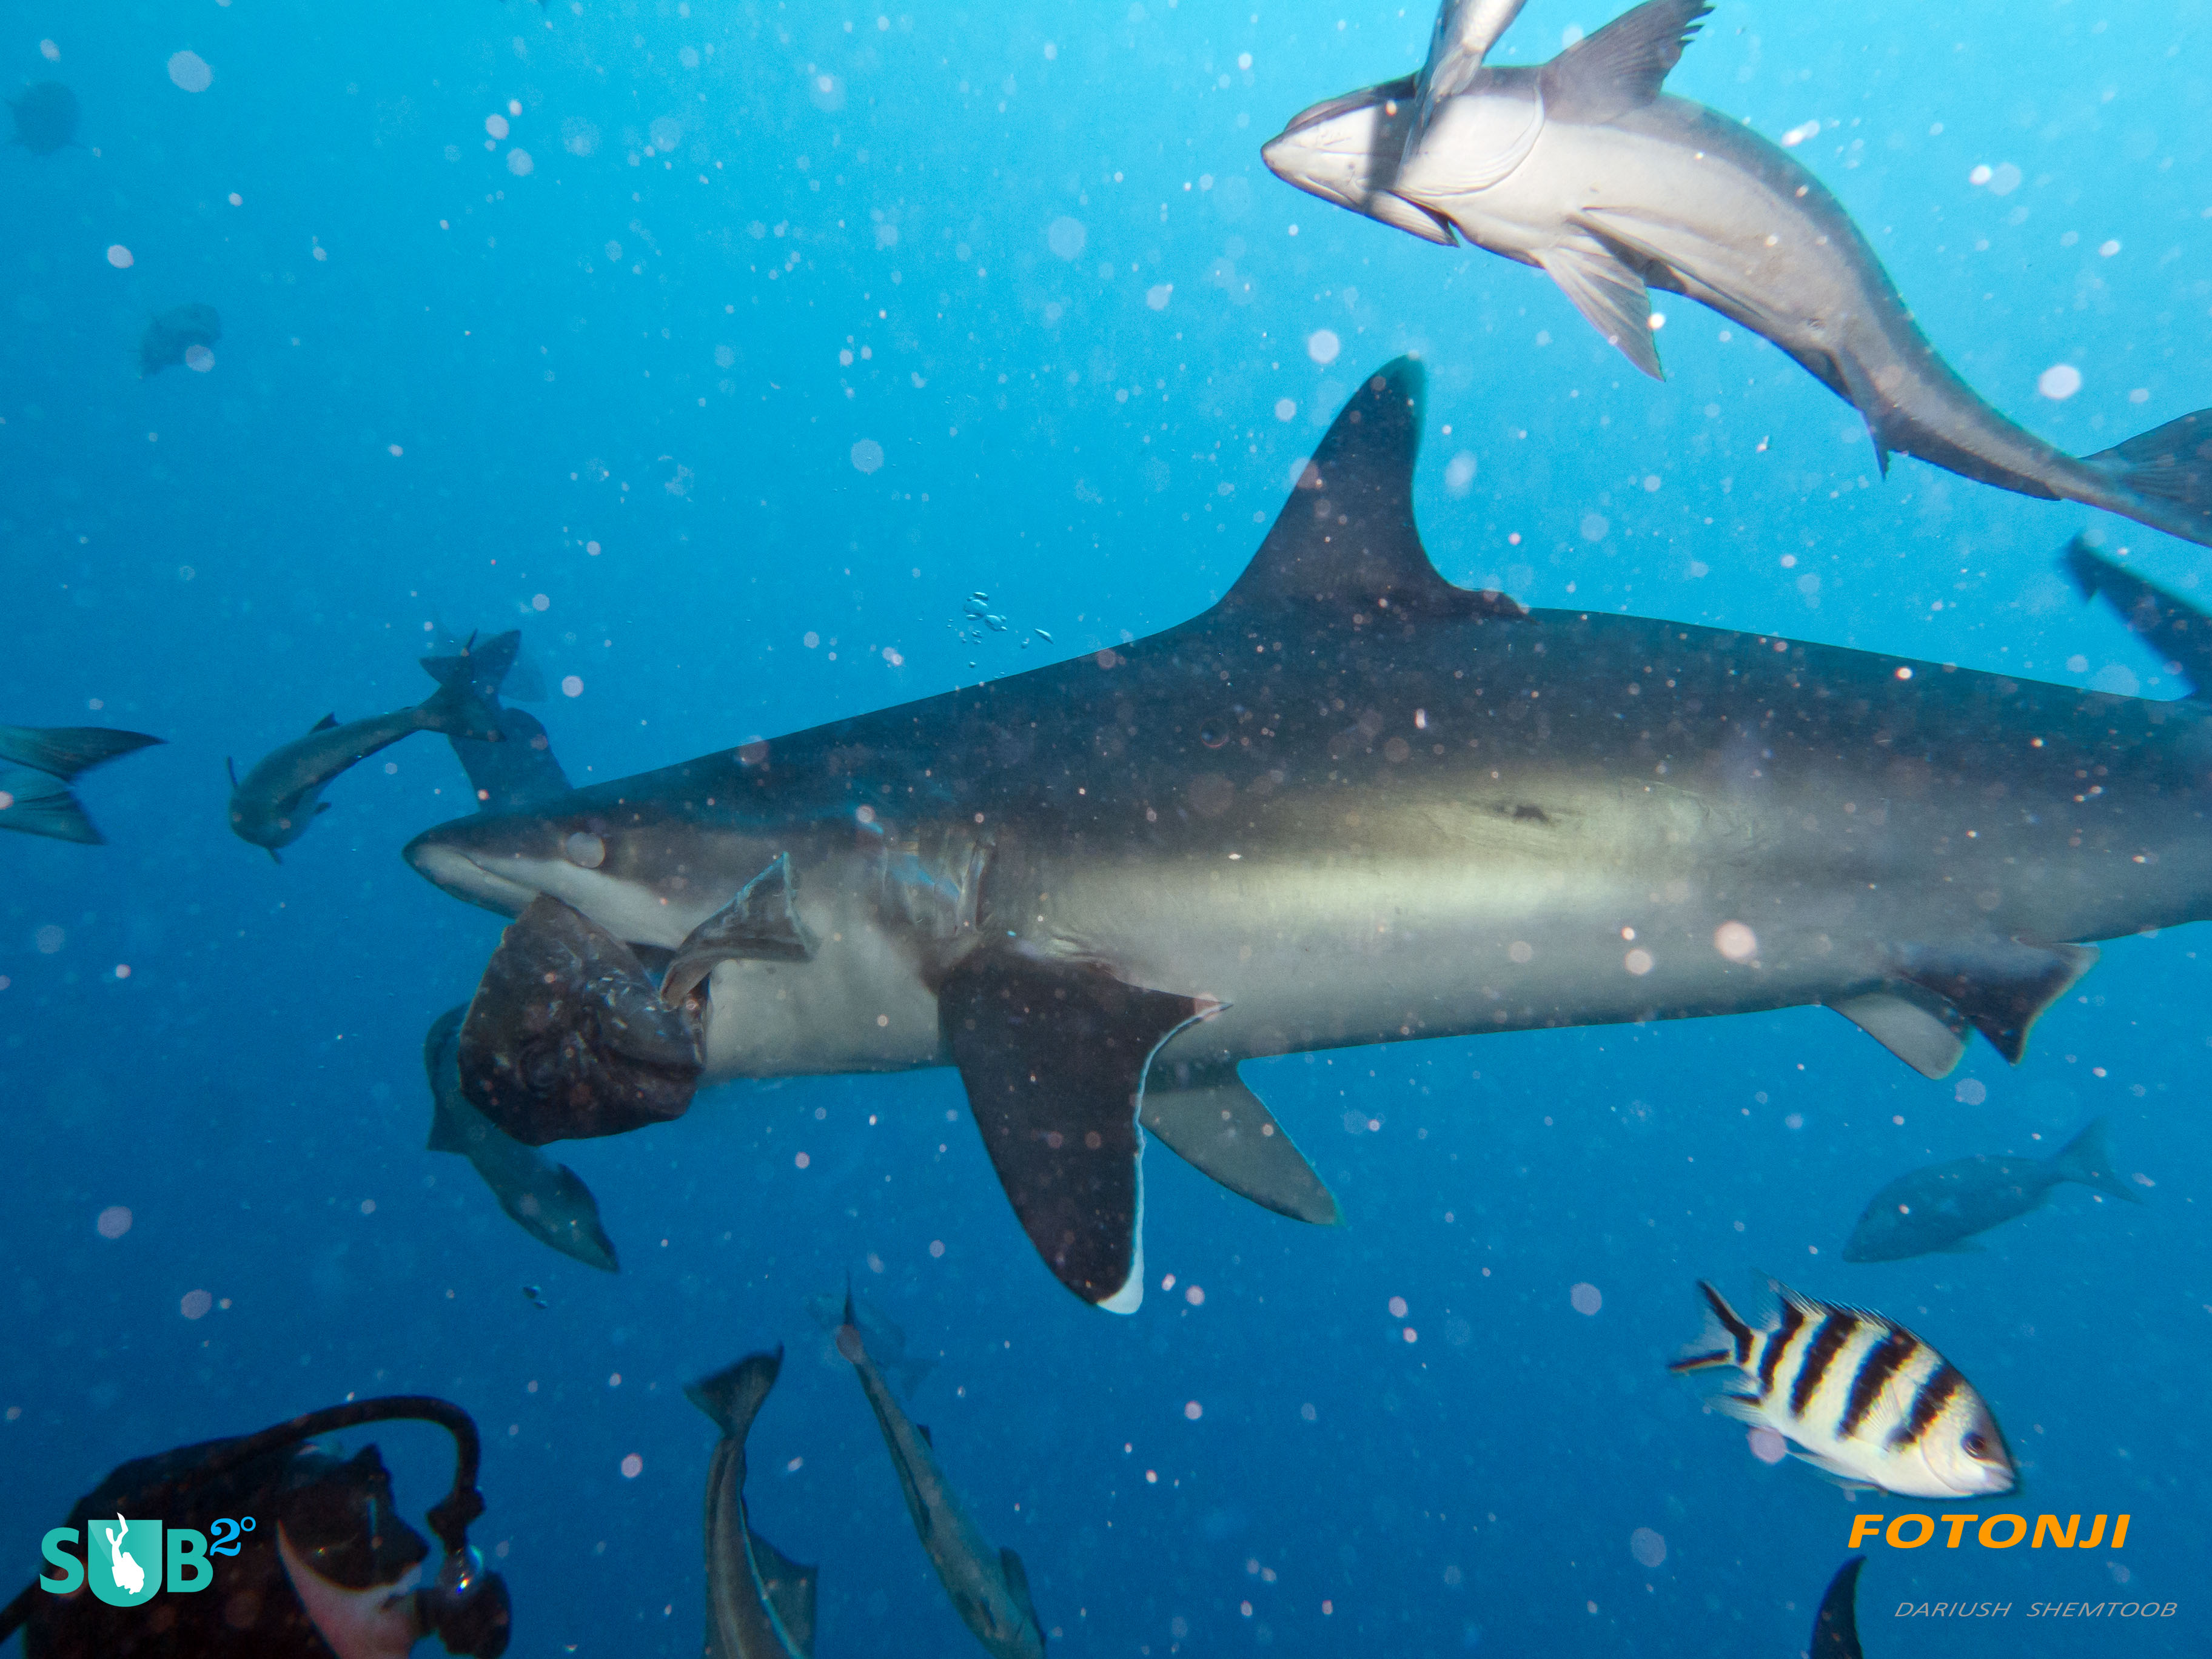 The wrangler holds his breath, keeping his cool, to draw the grey reef shark closer in.